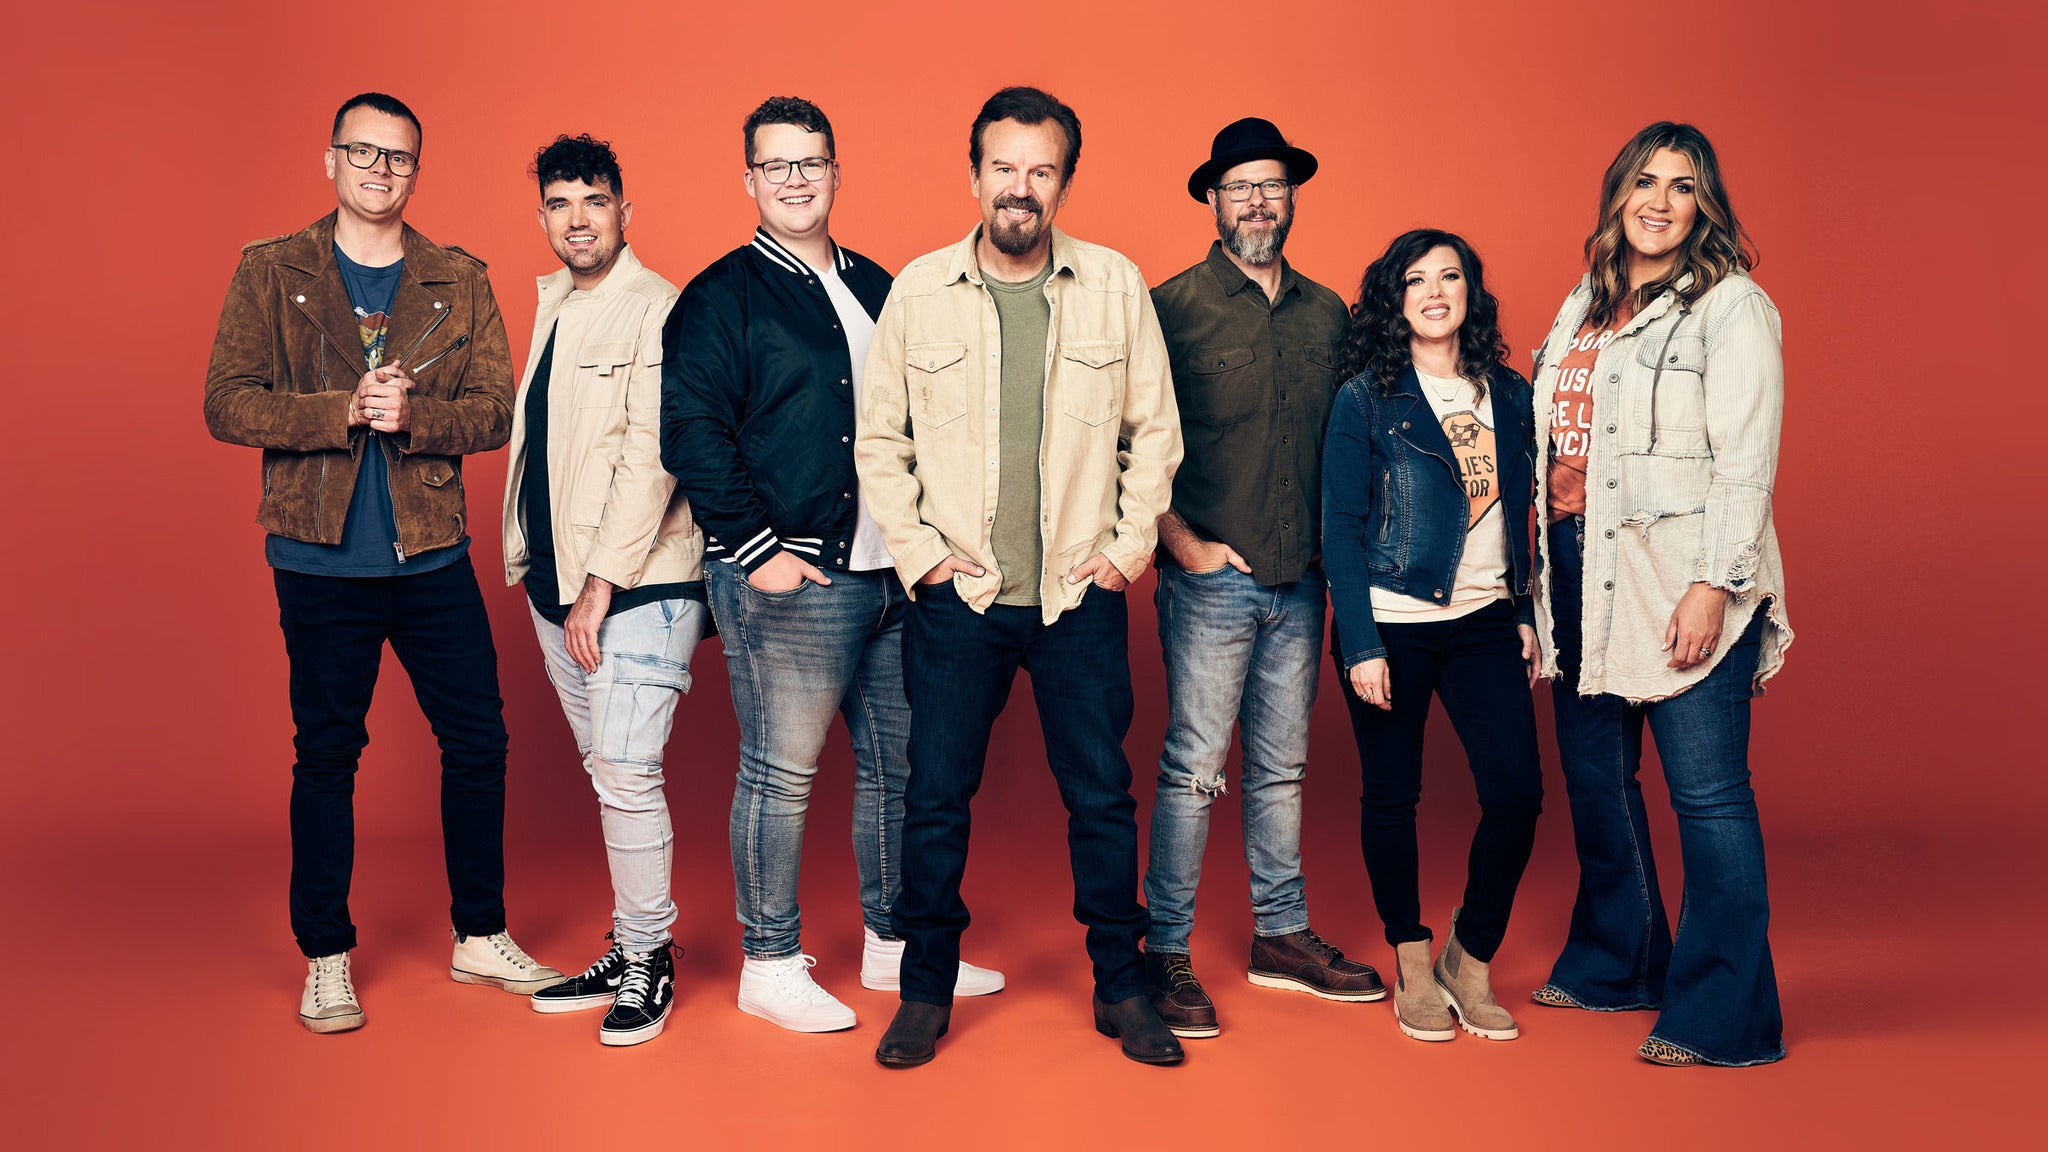 Casting Crowns - The Healer Tour at Amway Center